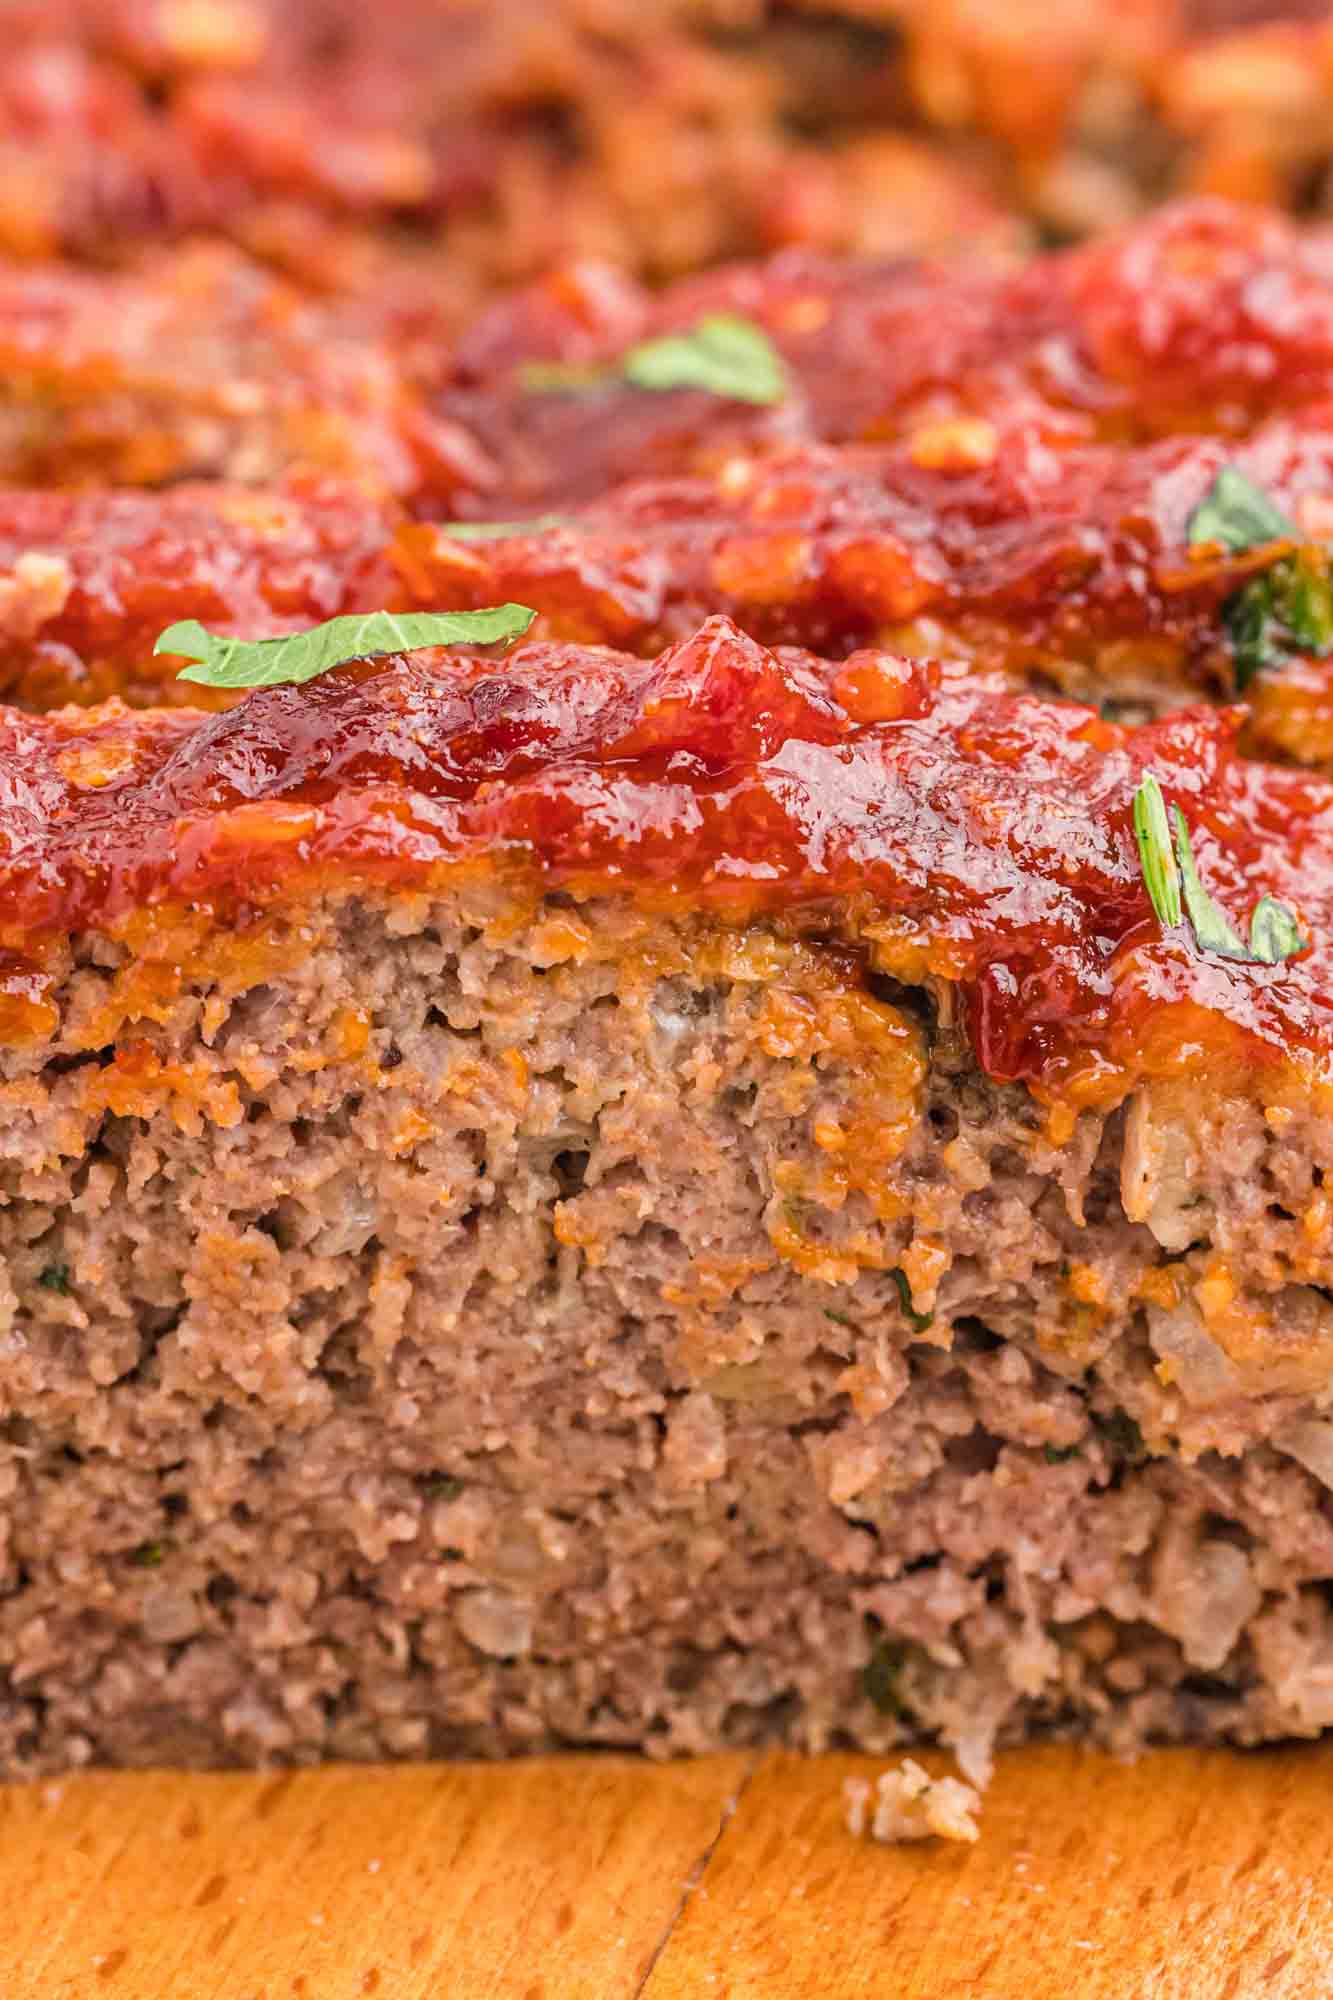 Close up shot of a meatloaf slice to show its texture